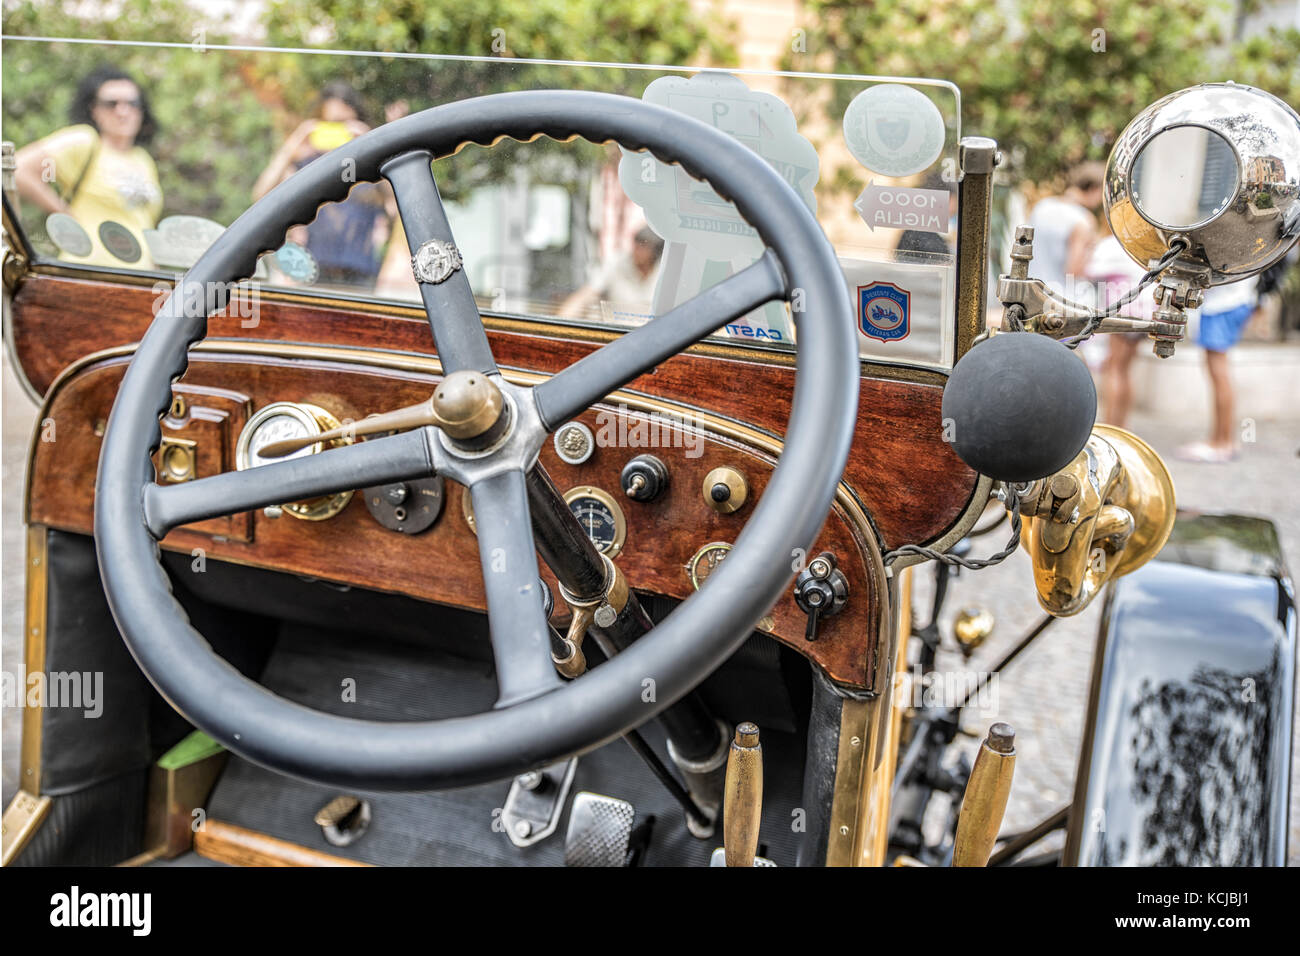 Italy Liguria Celle Ligure Antique car meeting Detail of steering wheel and interior antique car Stock Photo